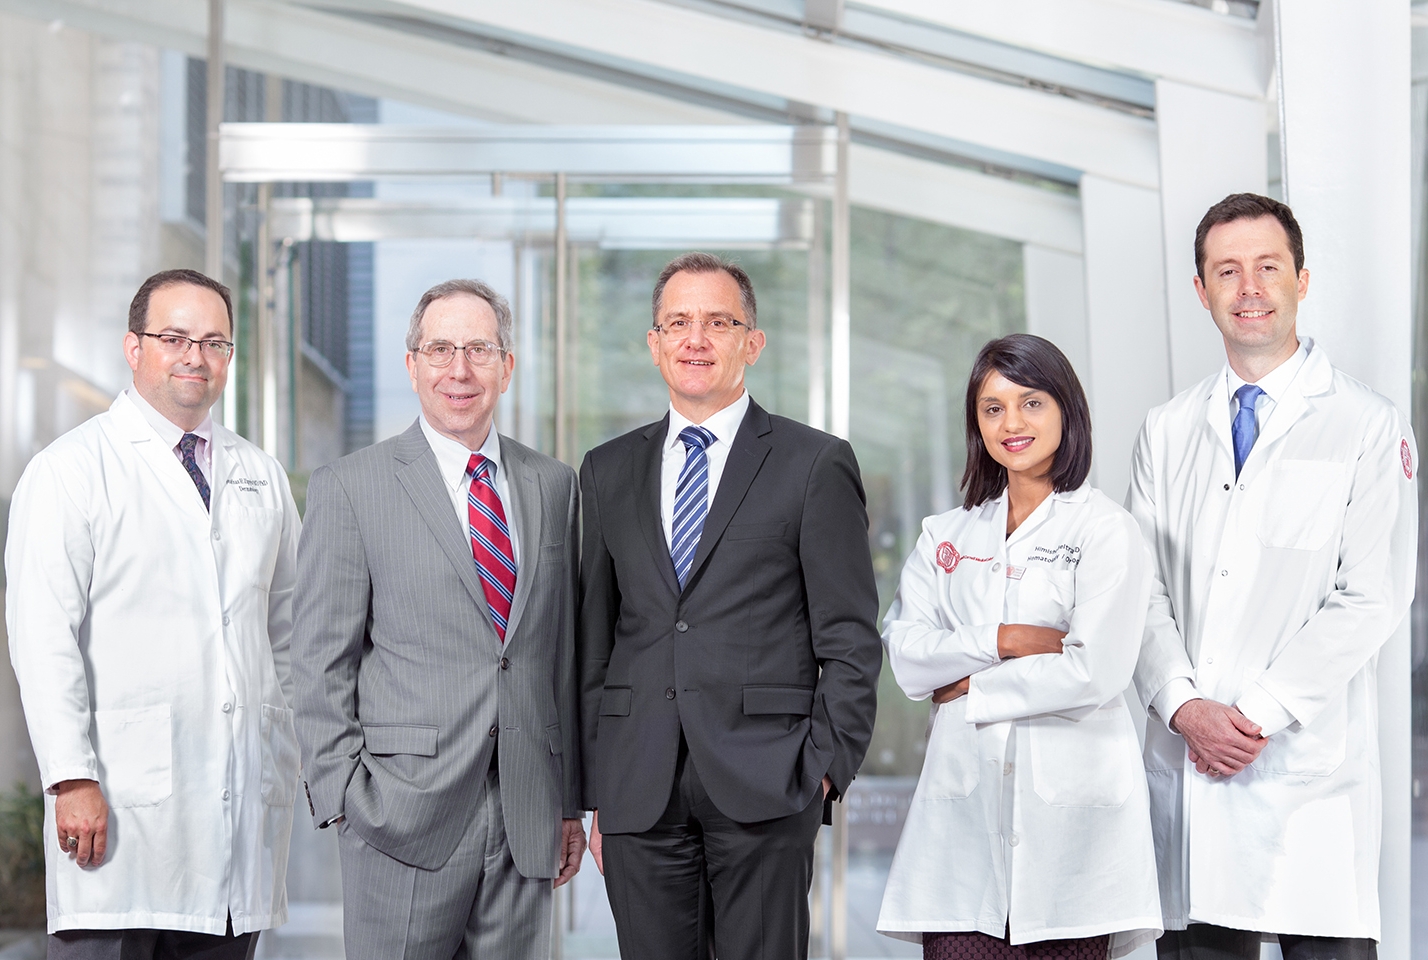 The Englander Institute’s expanded program will target additional areas of oncology including melanoma, a rare but serious form of skin cancer. Front left, Chair of Dermatology Dr. Richard Granstein, and front right, Englander Institute Director Dr. Mark Rubin. In white coats, from left, physician-scientists Drs. Jonathan Zippin, Himisha Beltran and Olivier Elemento. Photo credit: Jason Andrew/Getty Images/WCMC